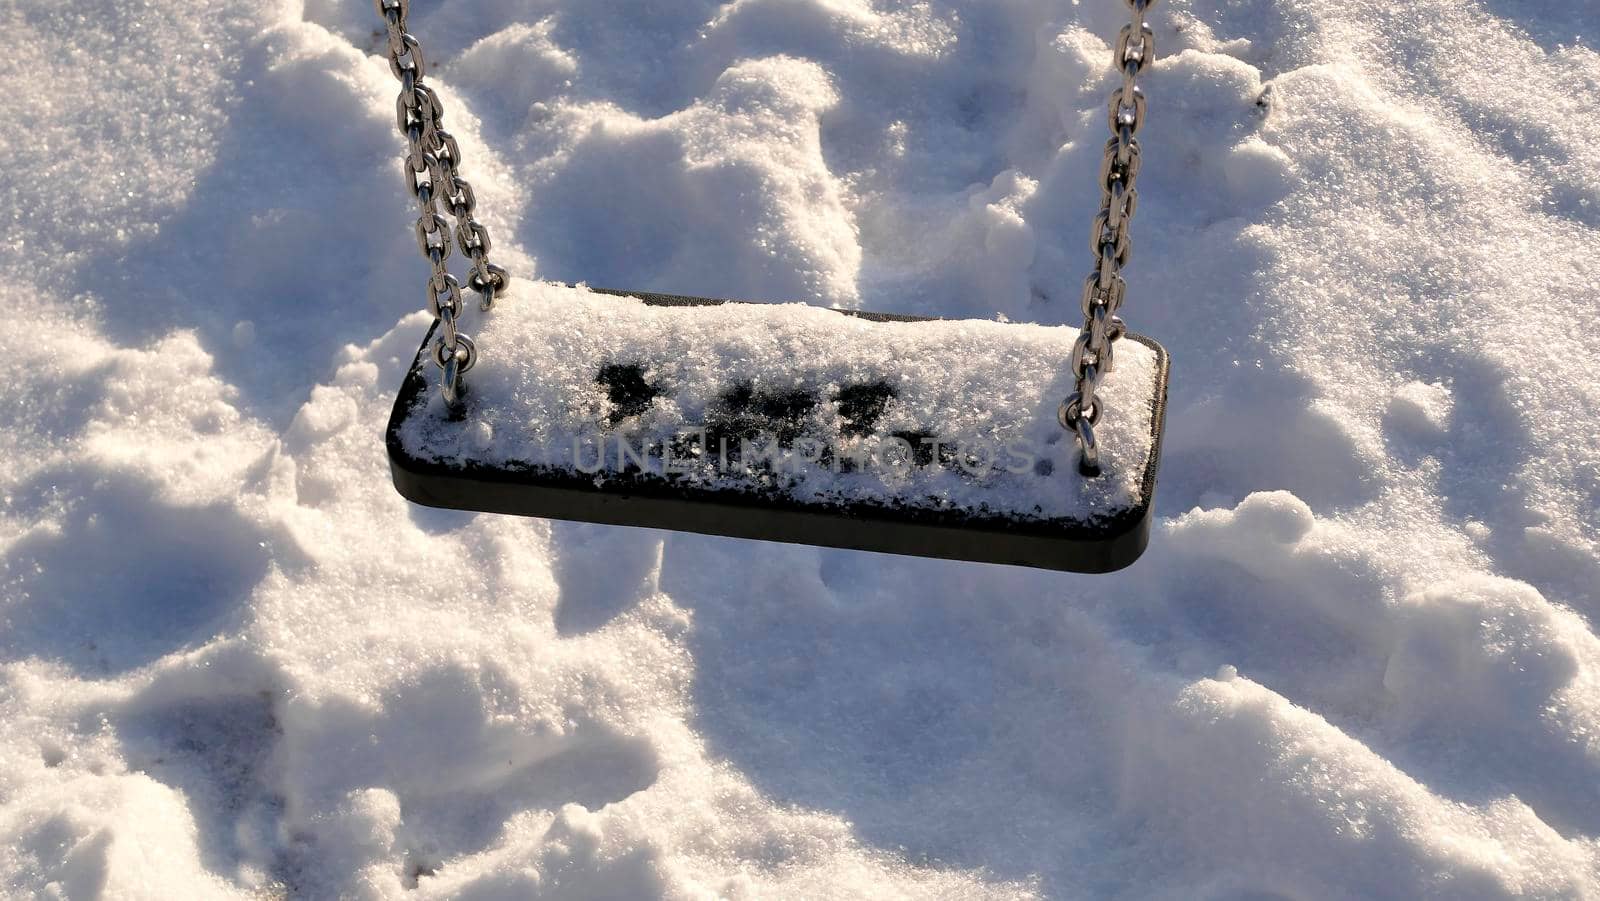 swing with snow cover in wintertime